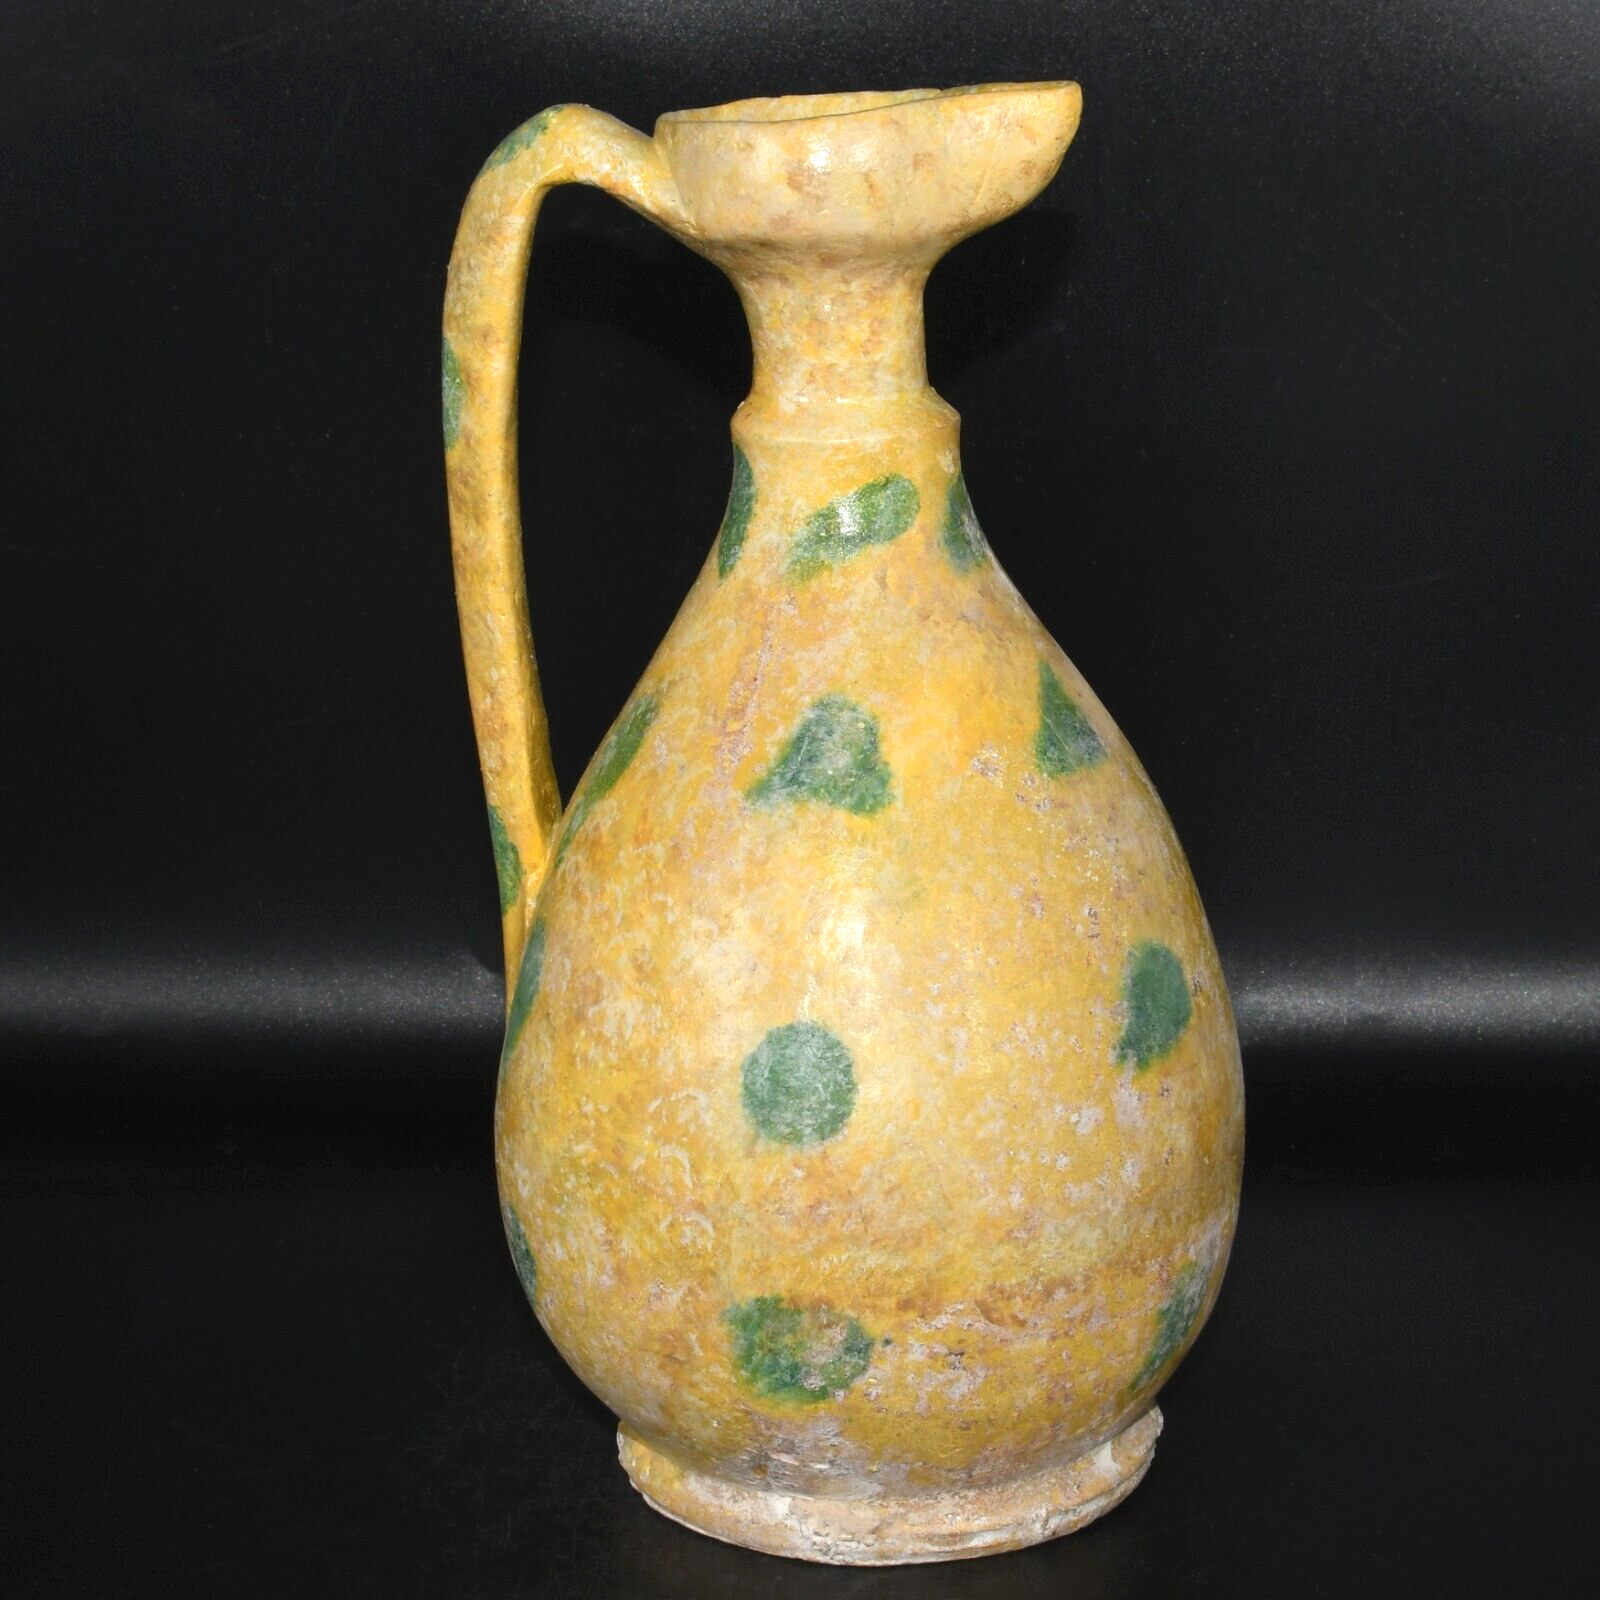 Intact Ancient Abbasid Caliphate Glazed Ceramic Ewer Pitcher 10th - 11th Century